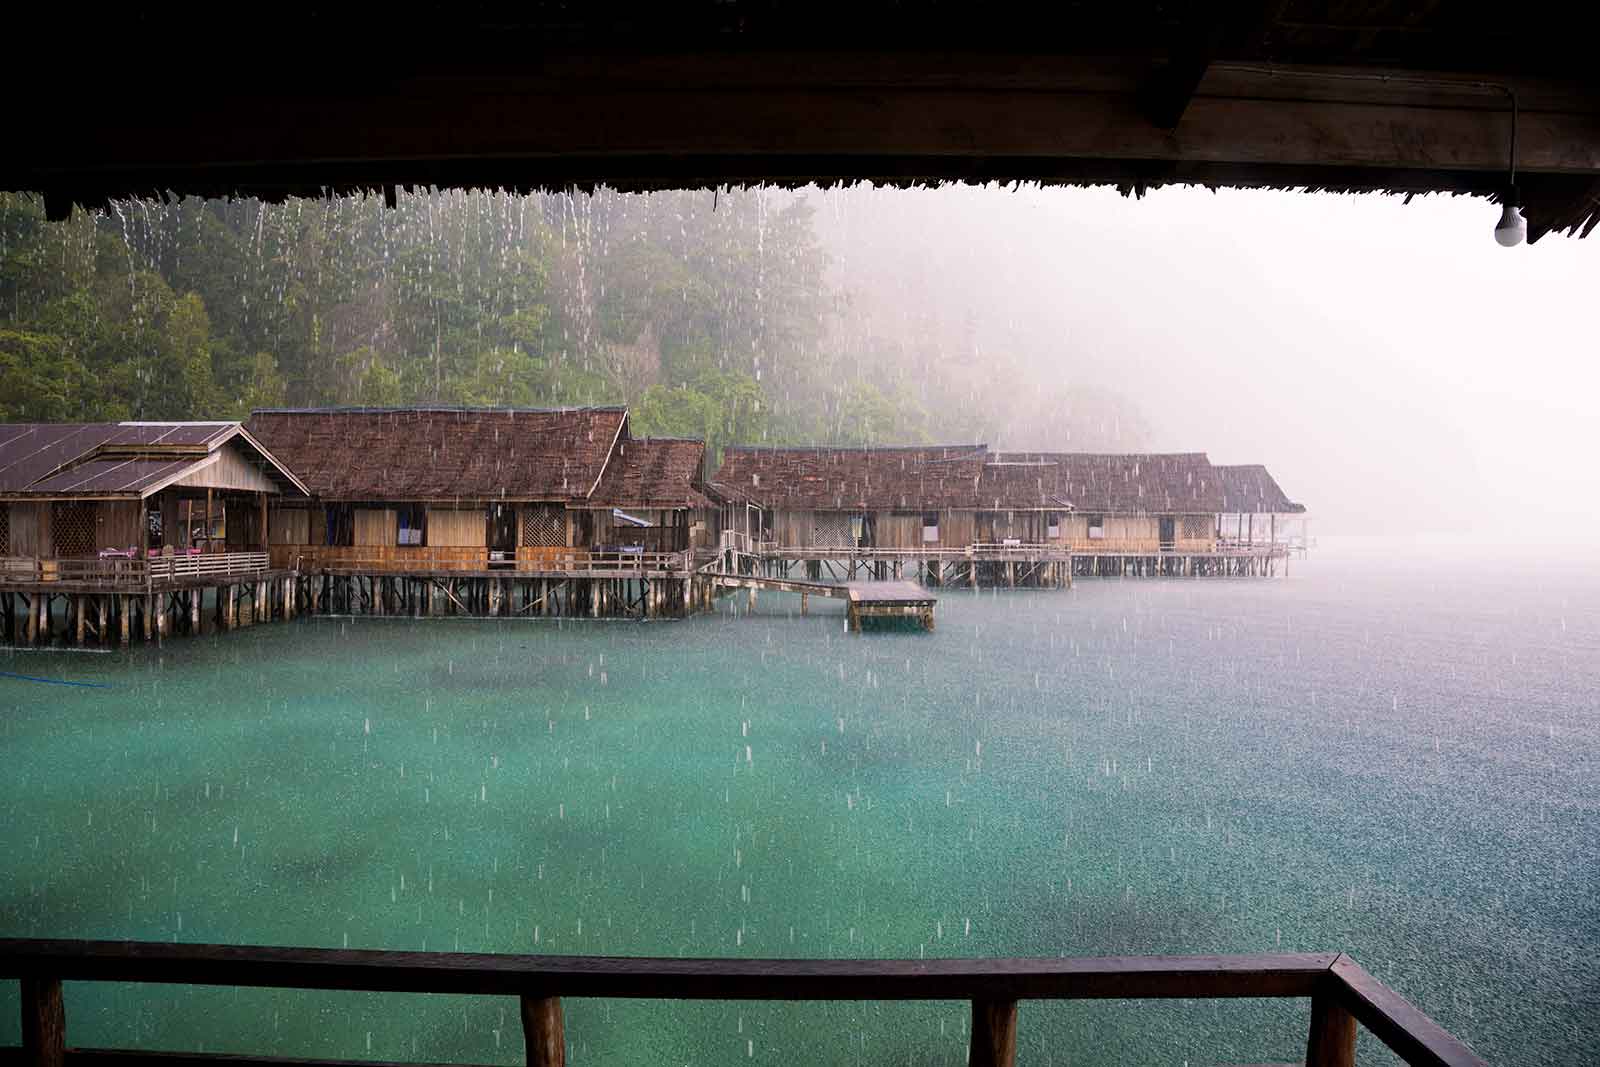 Maluku Islands: If you're visiting Indonesia during the rainy season, you'll have to face downpours like this quite often. Sometimes it rains for days, sometimes the rain stops just as fast as it came. Here we were at Lisar Bahari Resort in Sawai on Seram island and it was actually a mystical atmosphere being above the water with this heavy storm hitting us.